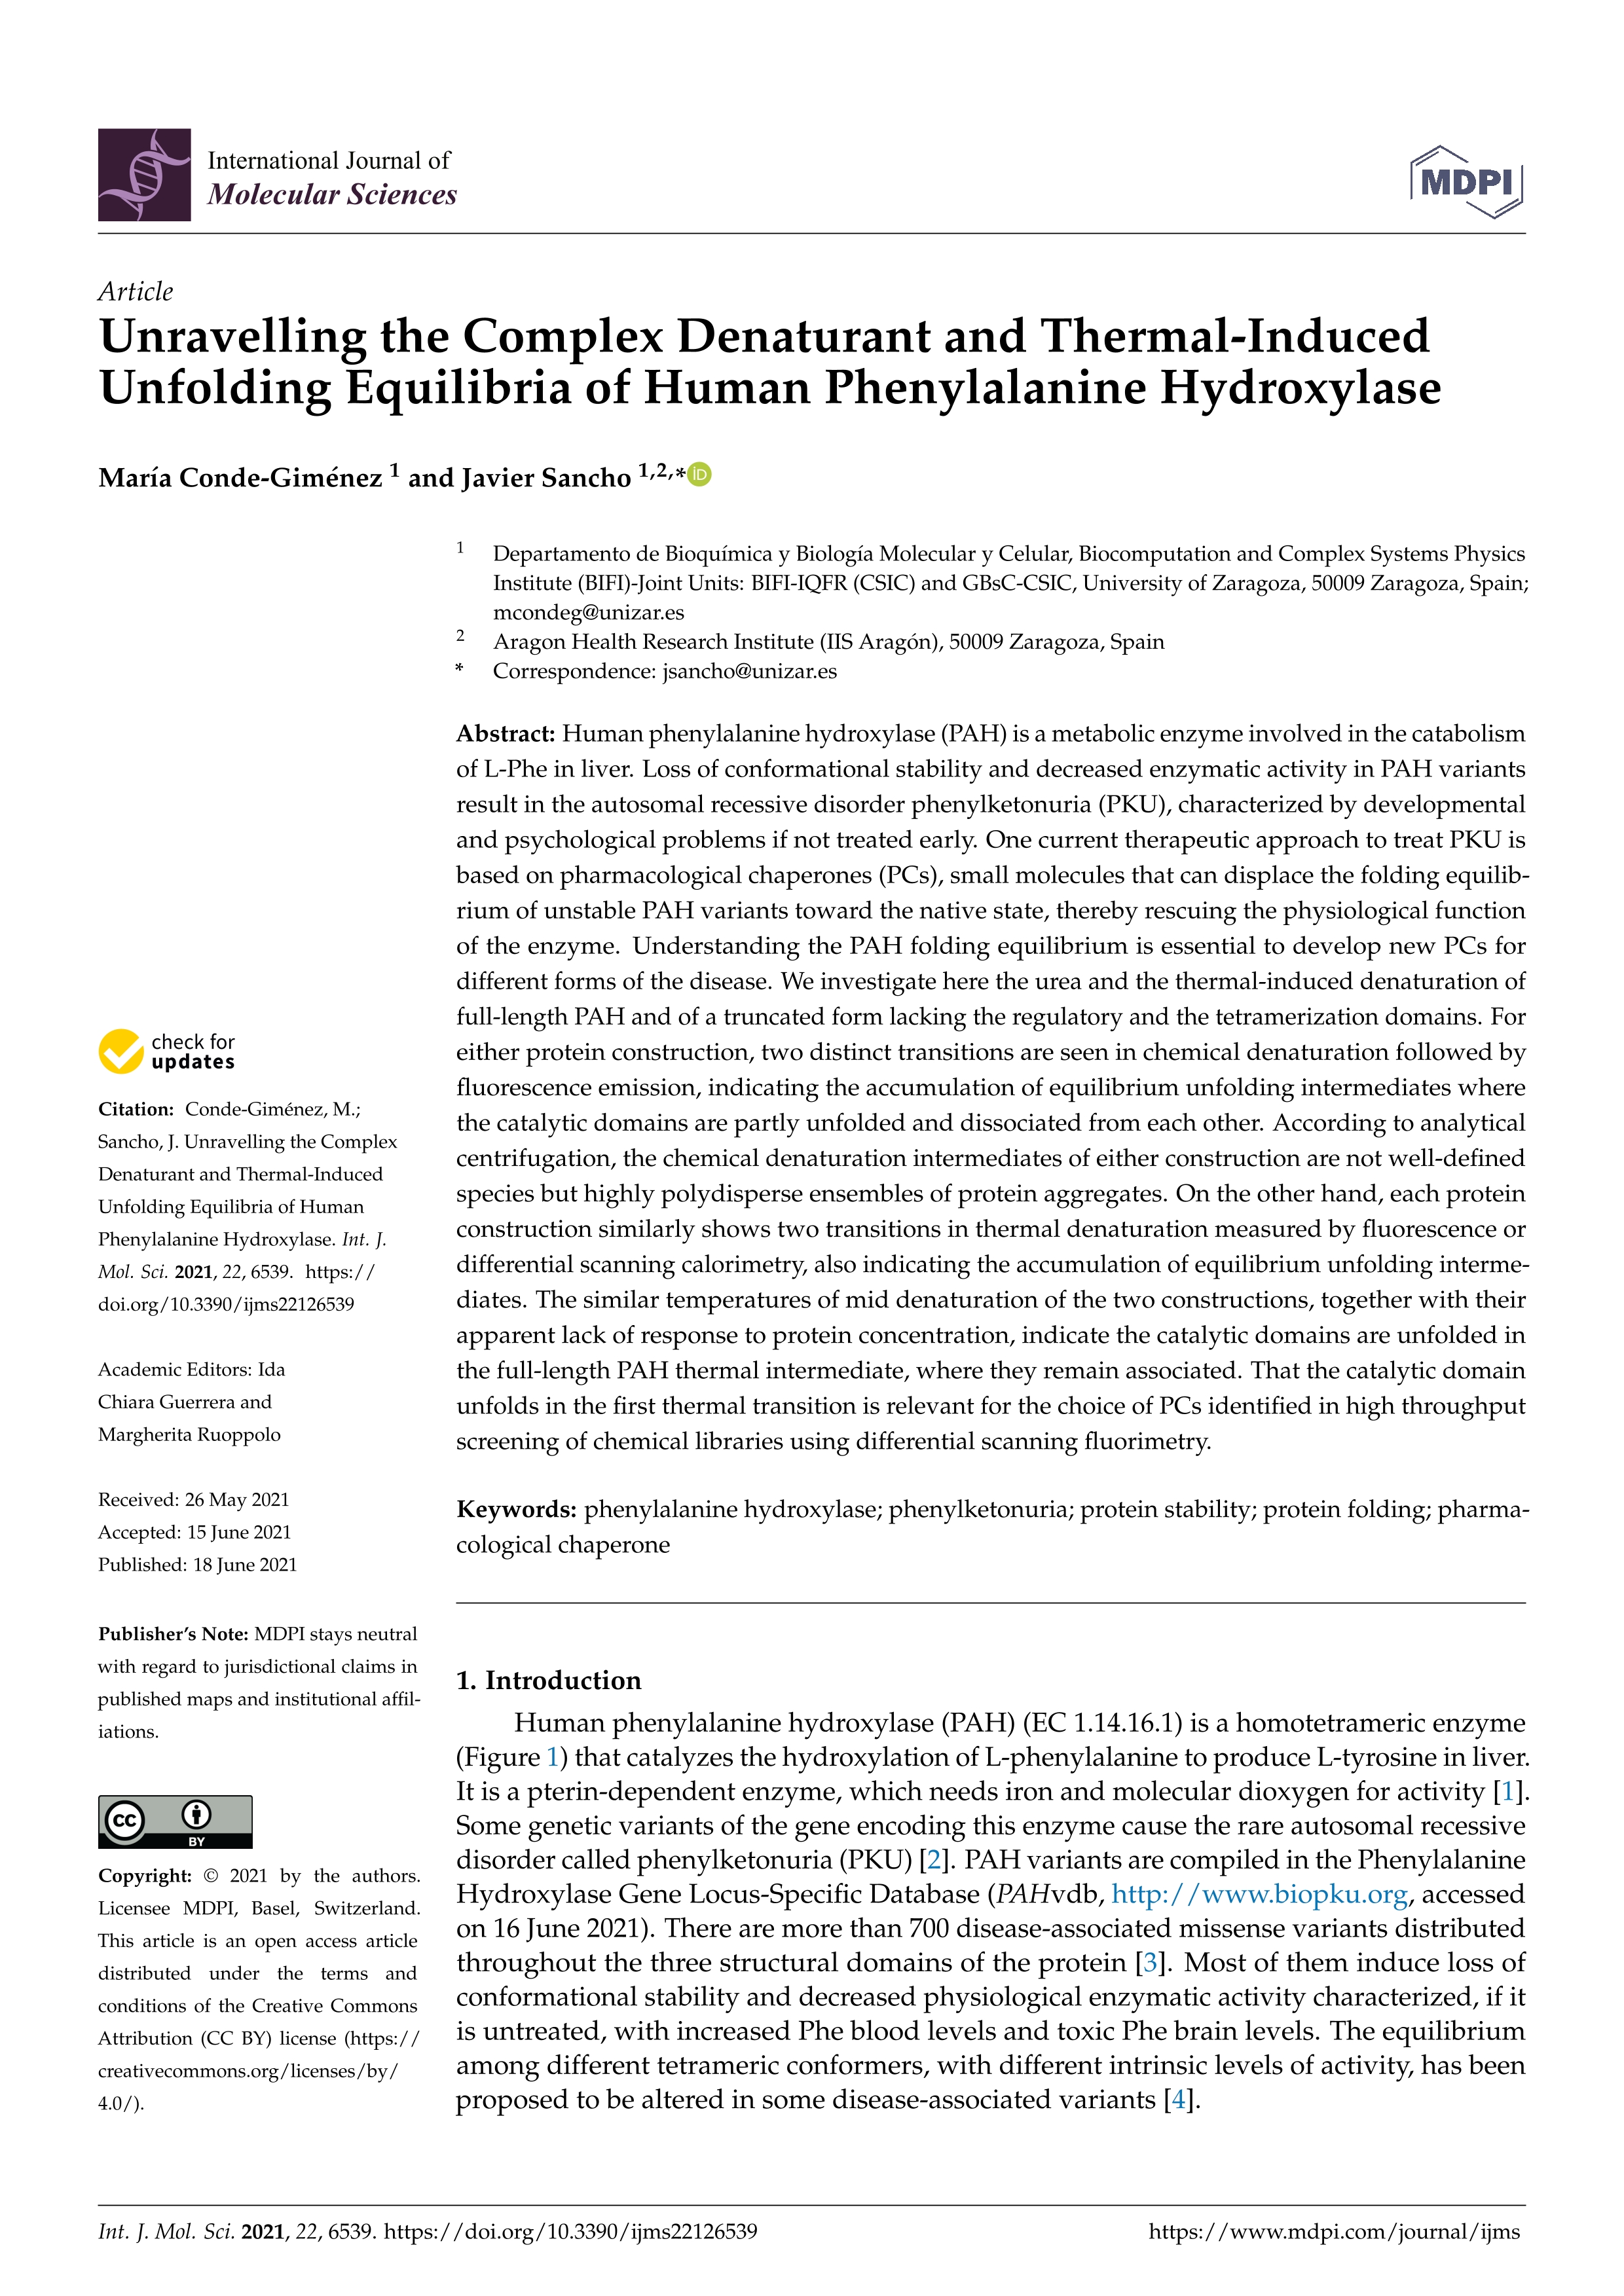 Unravelling the Complex Denaturant and Thermal-Induced Unfolding Equilibria of Human Phenylalanine Hydroxylase